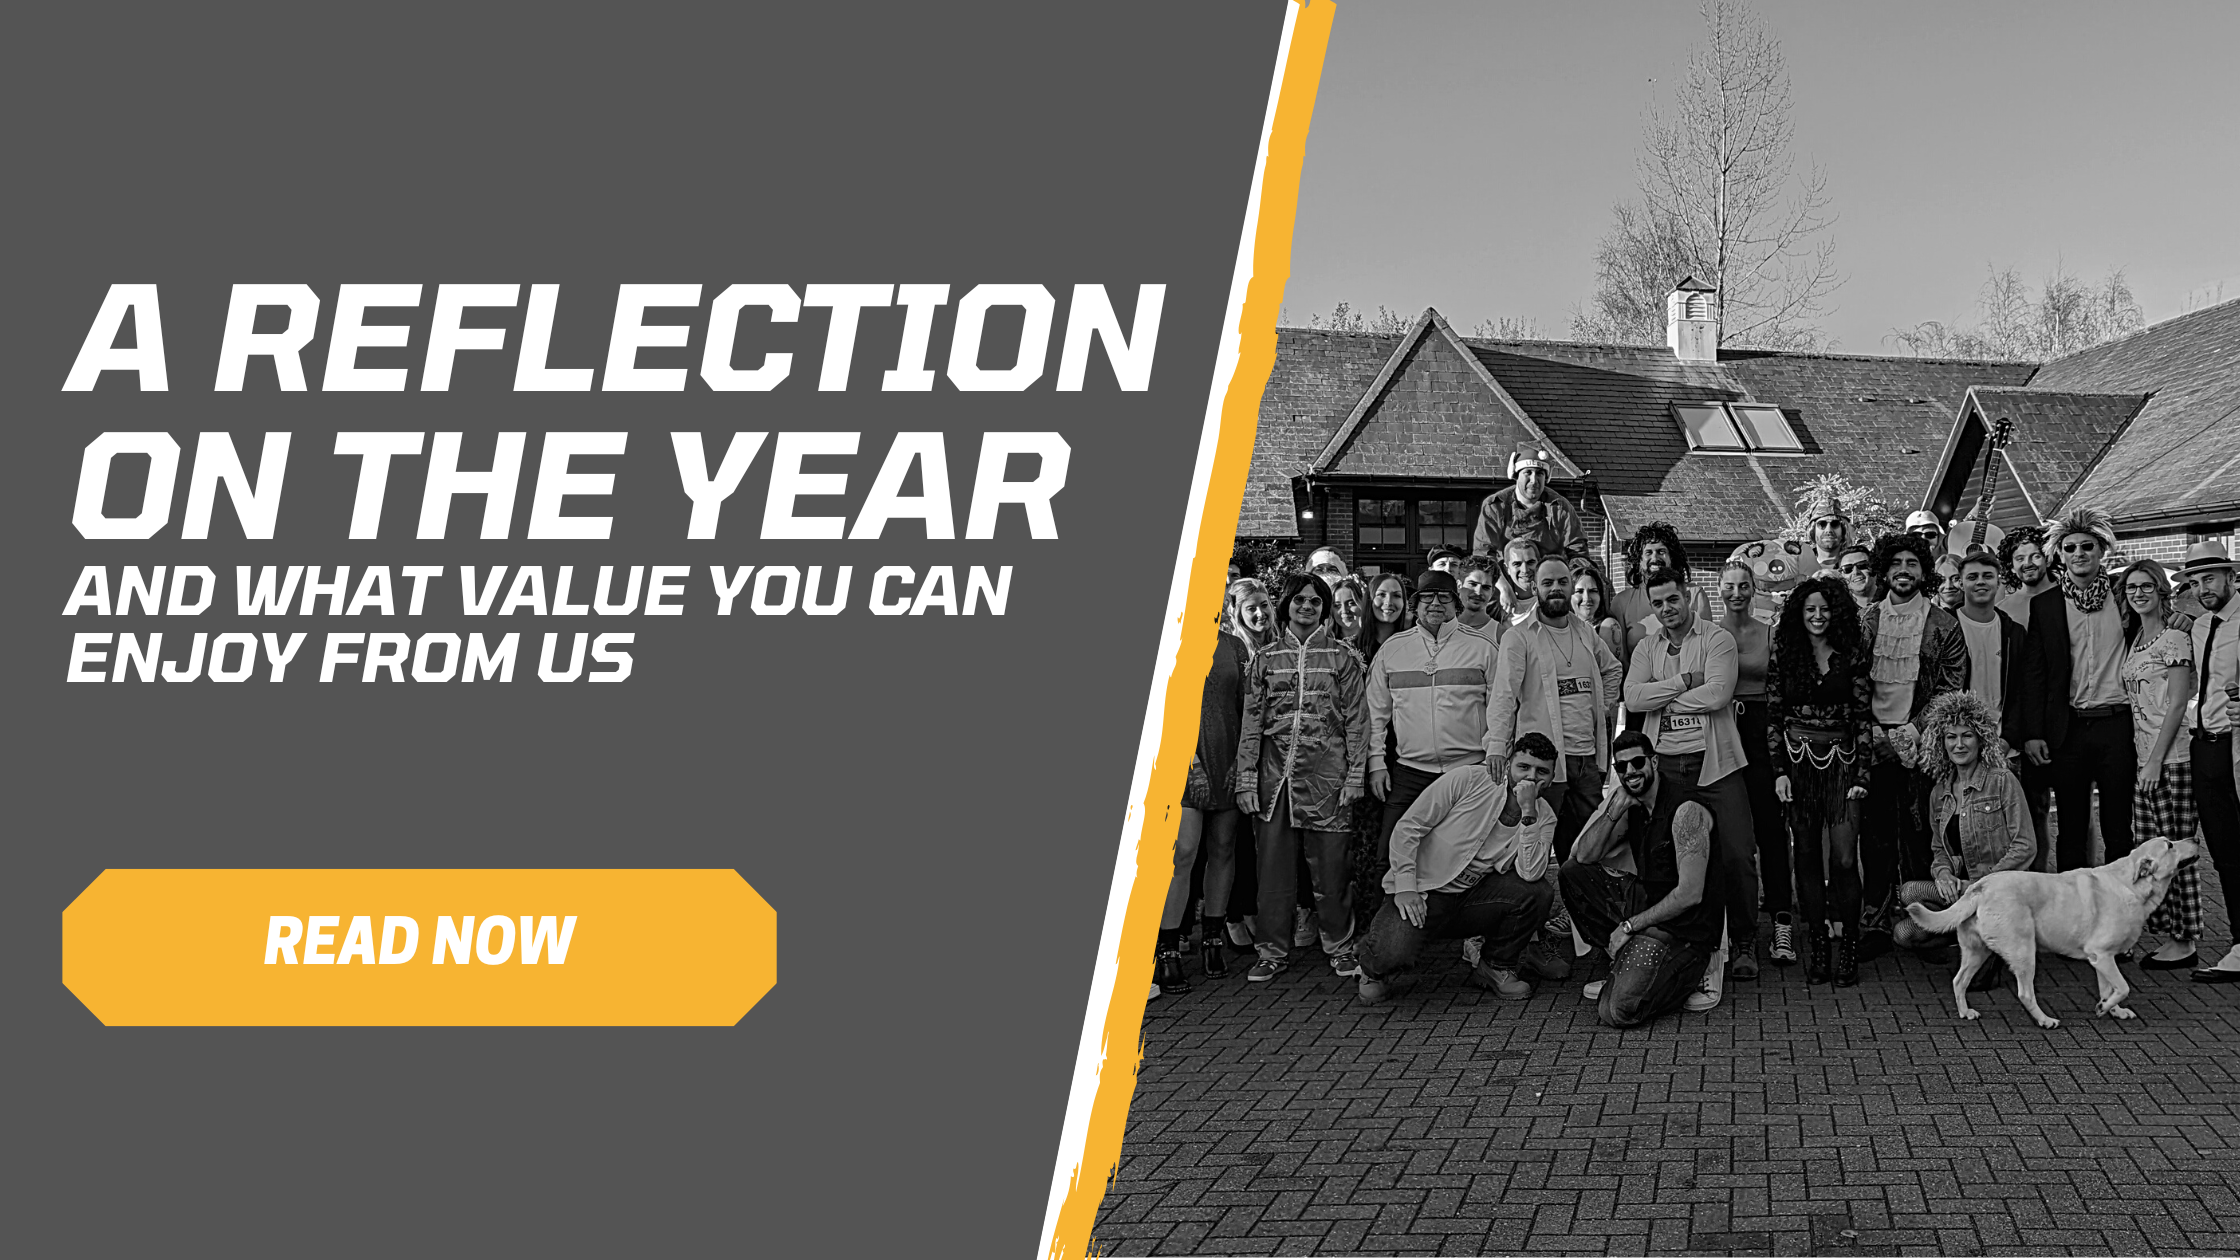 A reflection of the year and what value you can enjoy with us